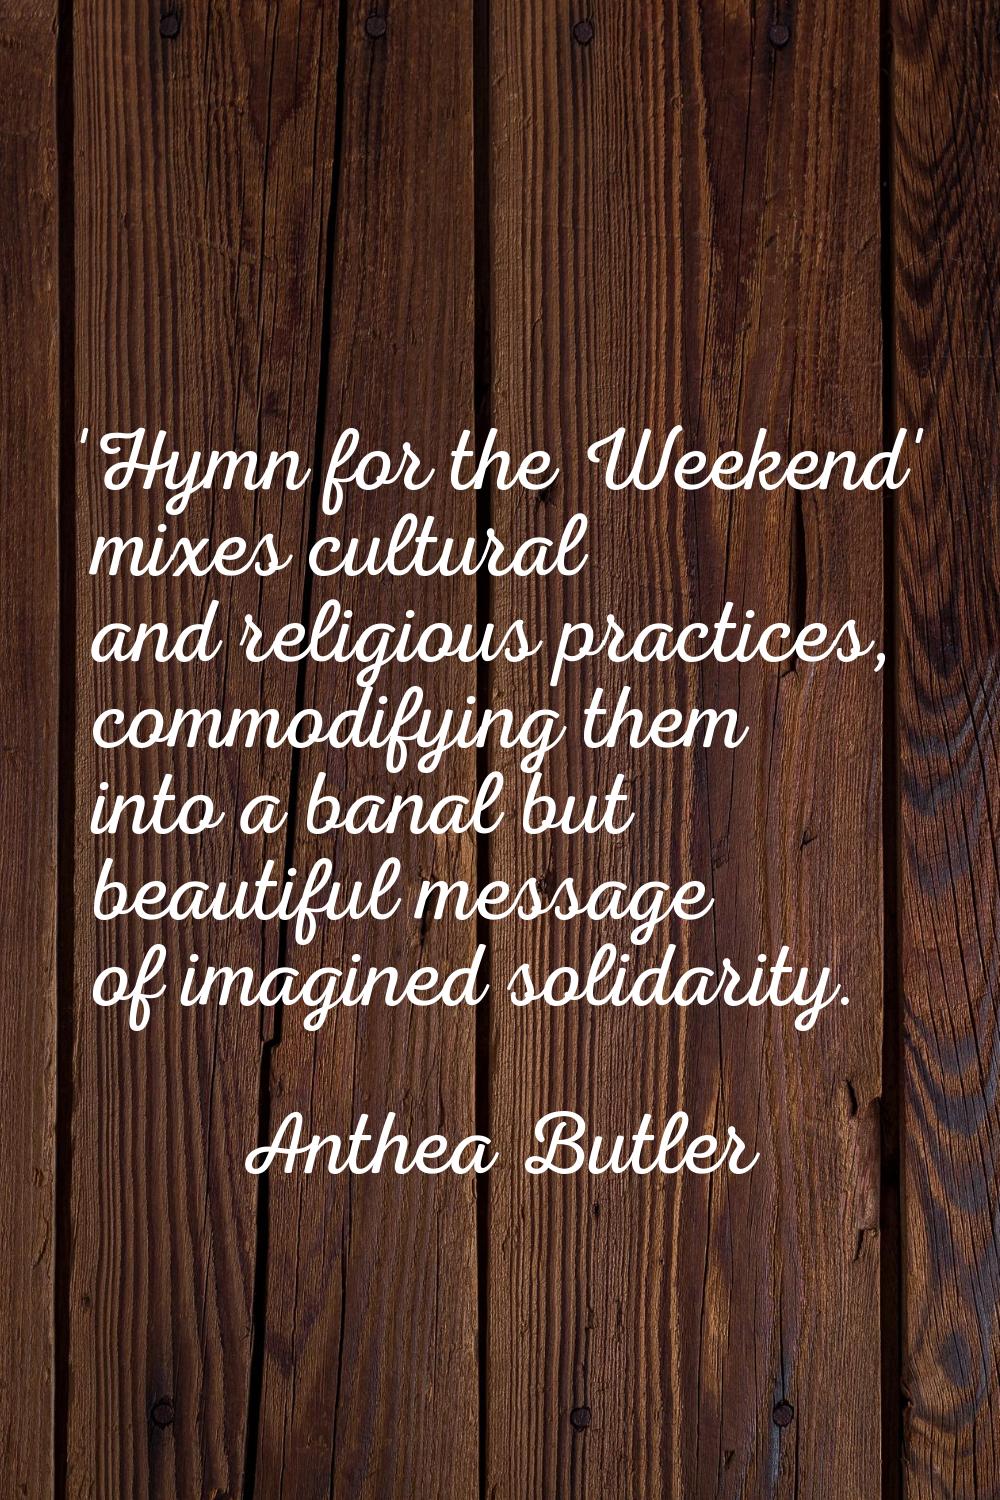 'Hymn for the Weekend' mixes cultural and religious practices, commodifying them into a banal but b